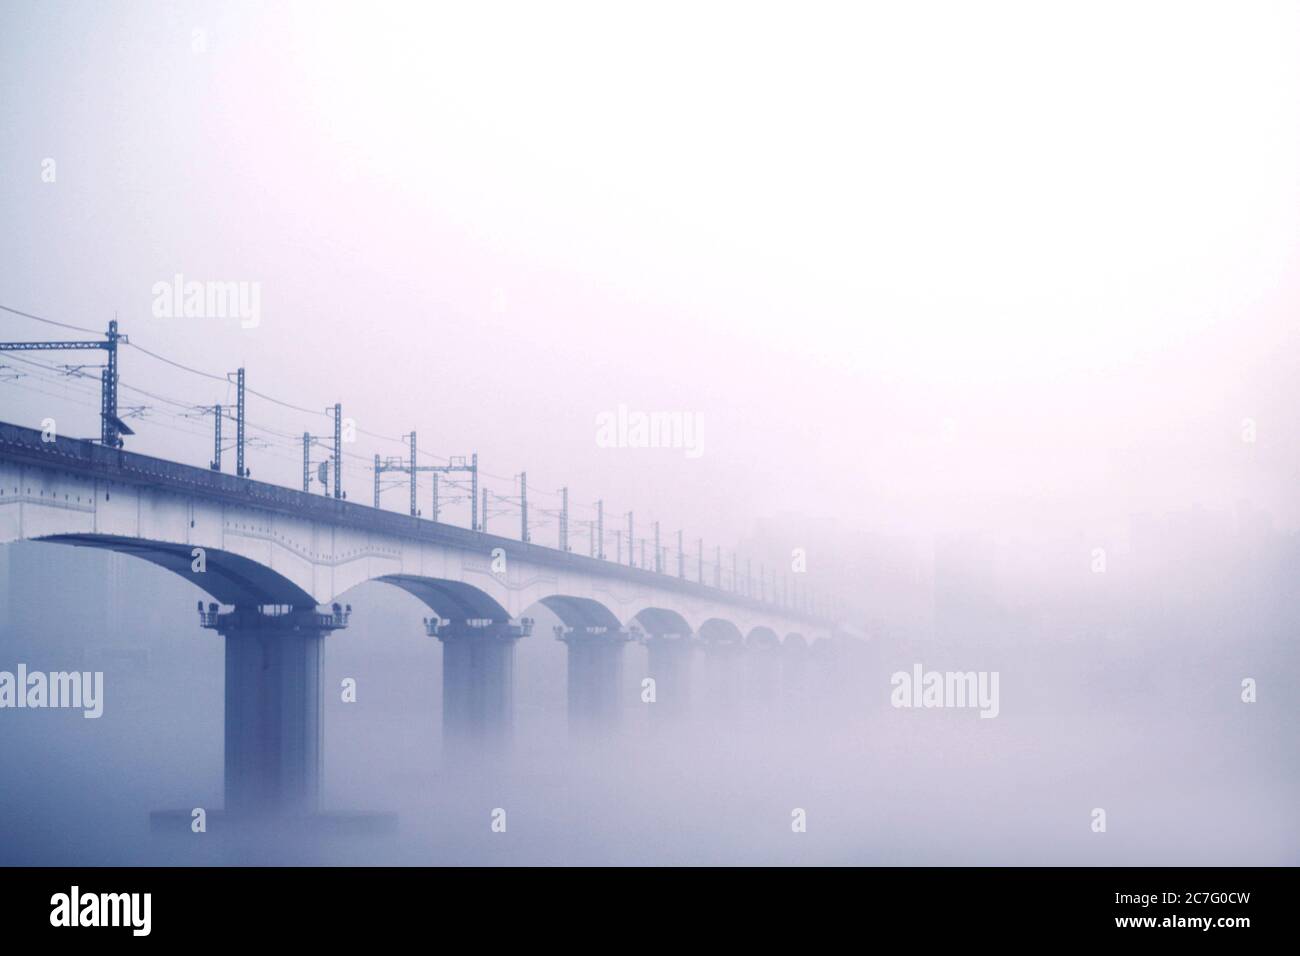 Railway arches bridge disappearing into the fog Stock Photo